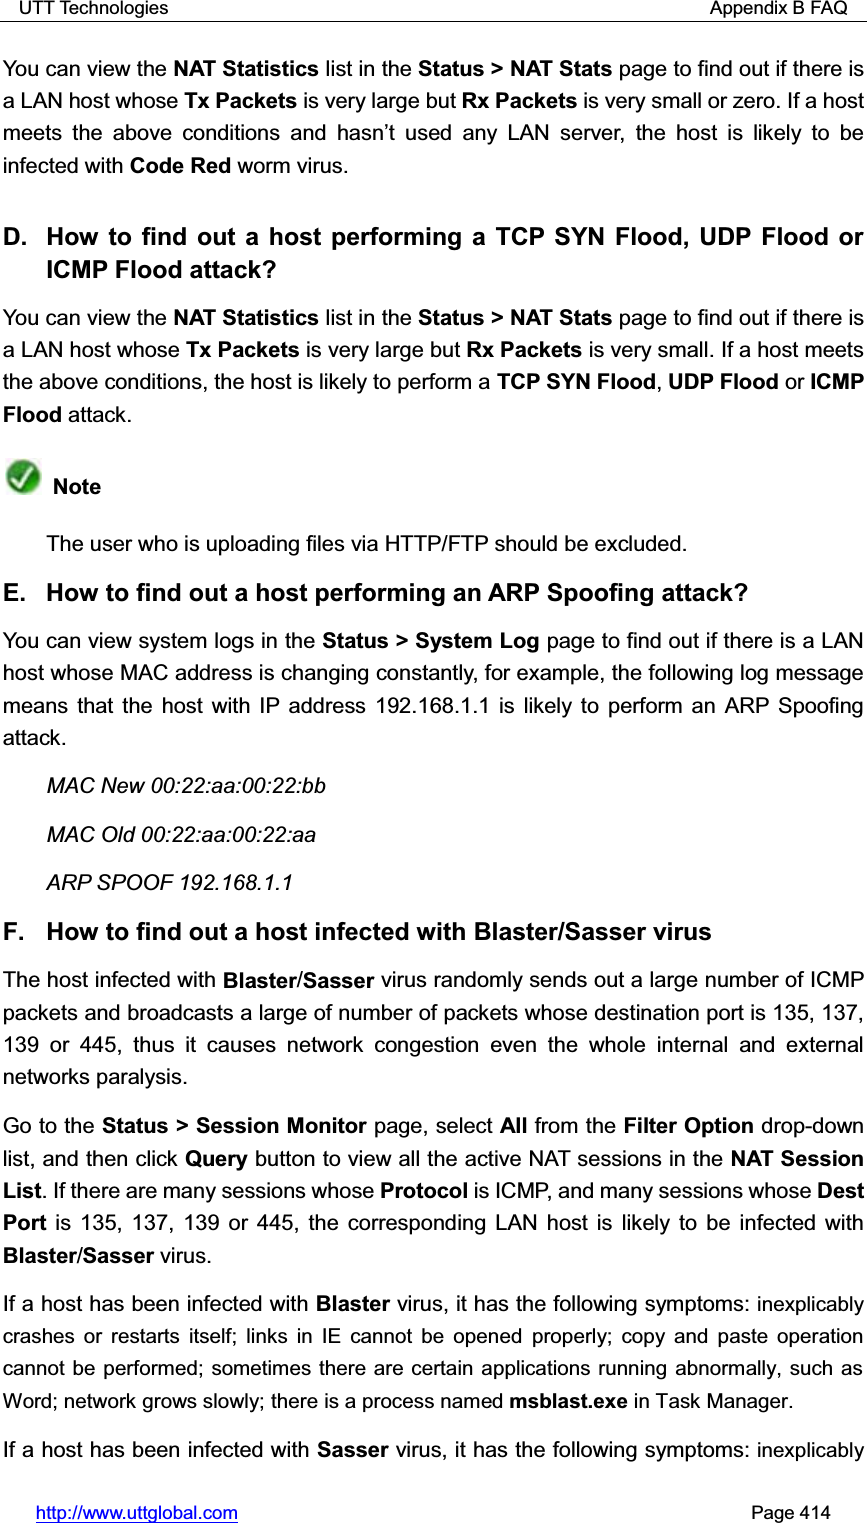 UTT Technologies                                                          Appendix B FAQ http://www.uttglobal.com                                                       Page 414 You can view the NAT Statistics list in the Status &gt; NAT Stats page to find out if there is a LAN host whose Tx Packets is very large but Rx Packets is very small or zero. If a host meets the above conditions and KDVQ¶W XVHG DQ\ /$1 VHUYHU the host is likely to be infected with Code Red worm virus. D.  How to find out a host performing a TCP SYN Flood, UDP Flood or ICMP Flood attack? You can view the NAT Statistics list in the Status &gt; NAT Stats page to find out if there is a LAN host whose Tx Packets is very large but Rx Packets is very small. If a host meets the above conditions, the host is likely to perform a TCP SYN Flood, UDP Flood or ICMP Flood attack. Note The user who is uploading files via HTTP/FTP should be excluded. E.  How to find out a host performing an ARP Spoofing attack? You can view system logs in the Status &gt; System Log page to find out if there is a LAN host whose MAC address is changing constantly, for example, the following log messagemeans that the host with IP address 192.168.1.1 is likely to perform an ARP Spoofing attack.  MAC New 00:22:aa:00:22:bb MAC Old 00:22:aa:00:22:aa ARP SPOOF 192.168.1.1 F.  How to find out a host infected with Blaster/Sasser virus The host infected with Blaster/Sasser virus randomly sends out a large number of ICMP packets and broadcasts a large of number of packets whose destination port is 135, 137, 139 or 445, thus it causes network congestion even the whole internal and external networks paralysis. Go to the Status &gt; Session Monitor page, select All from the Filter Option drop-down list, and then click Query button to view all the active NAT sessions in the NAT Session List. If there are many sessions whose Protocol is ICMP, and many sessions whose Dest Port is 135, 137, 139 or 445, the corresponding LAN host is likely to be infected with Blaster/Sasser virus. If a host has been infected with Blaster virus, it has the following symptoms: inexplicably crashes or restarts itself; links in IE cannot be opened properly; copy and paste operation cannot be performed; sometimes there are certain applications running abnormally, such as Word; network grows slowly; there is a process named msblast.exe in Task Manager.If a host has been infected with Sasser virus, it has the following symptoms: inexplicably 